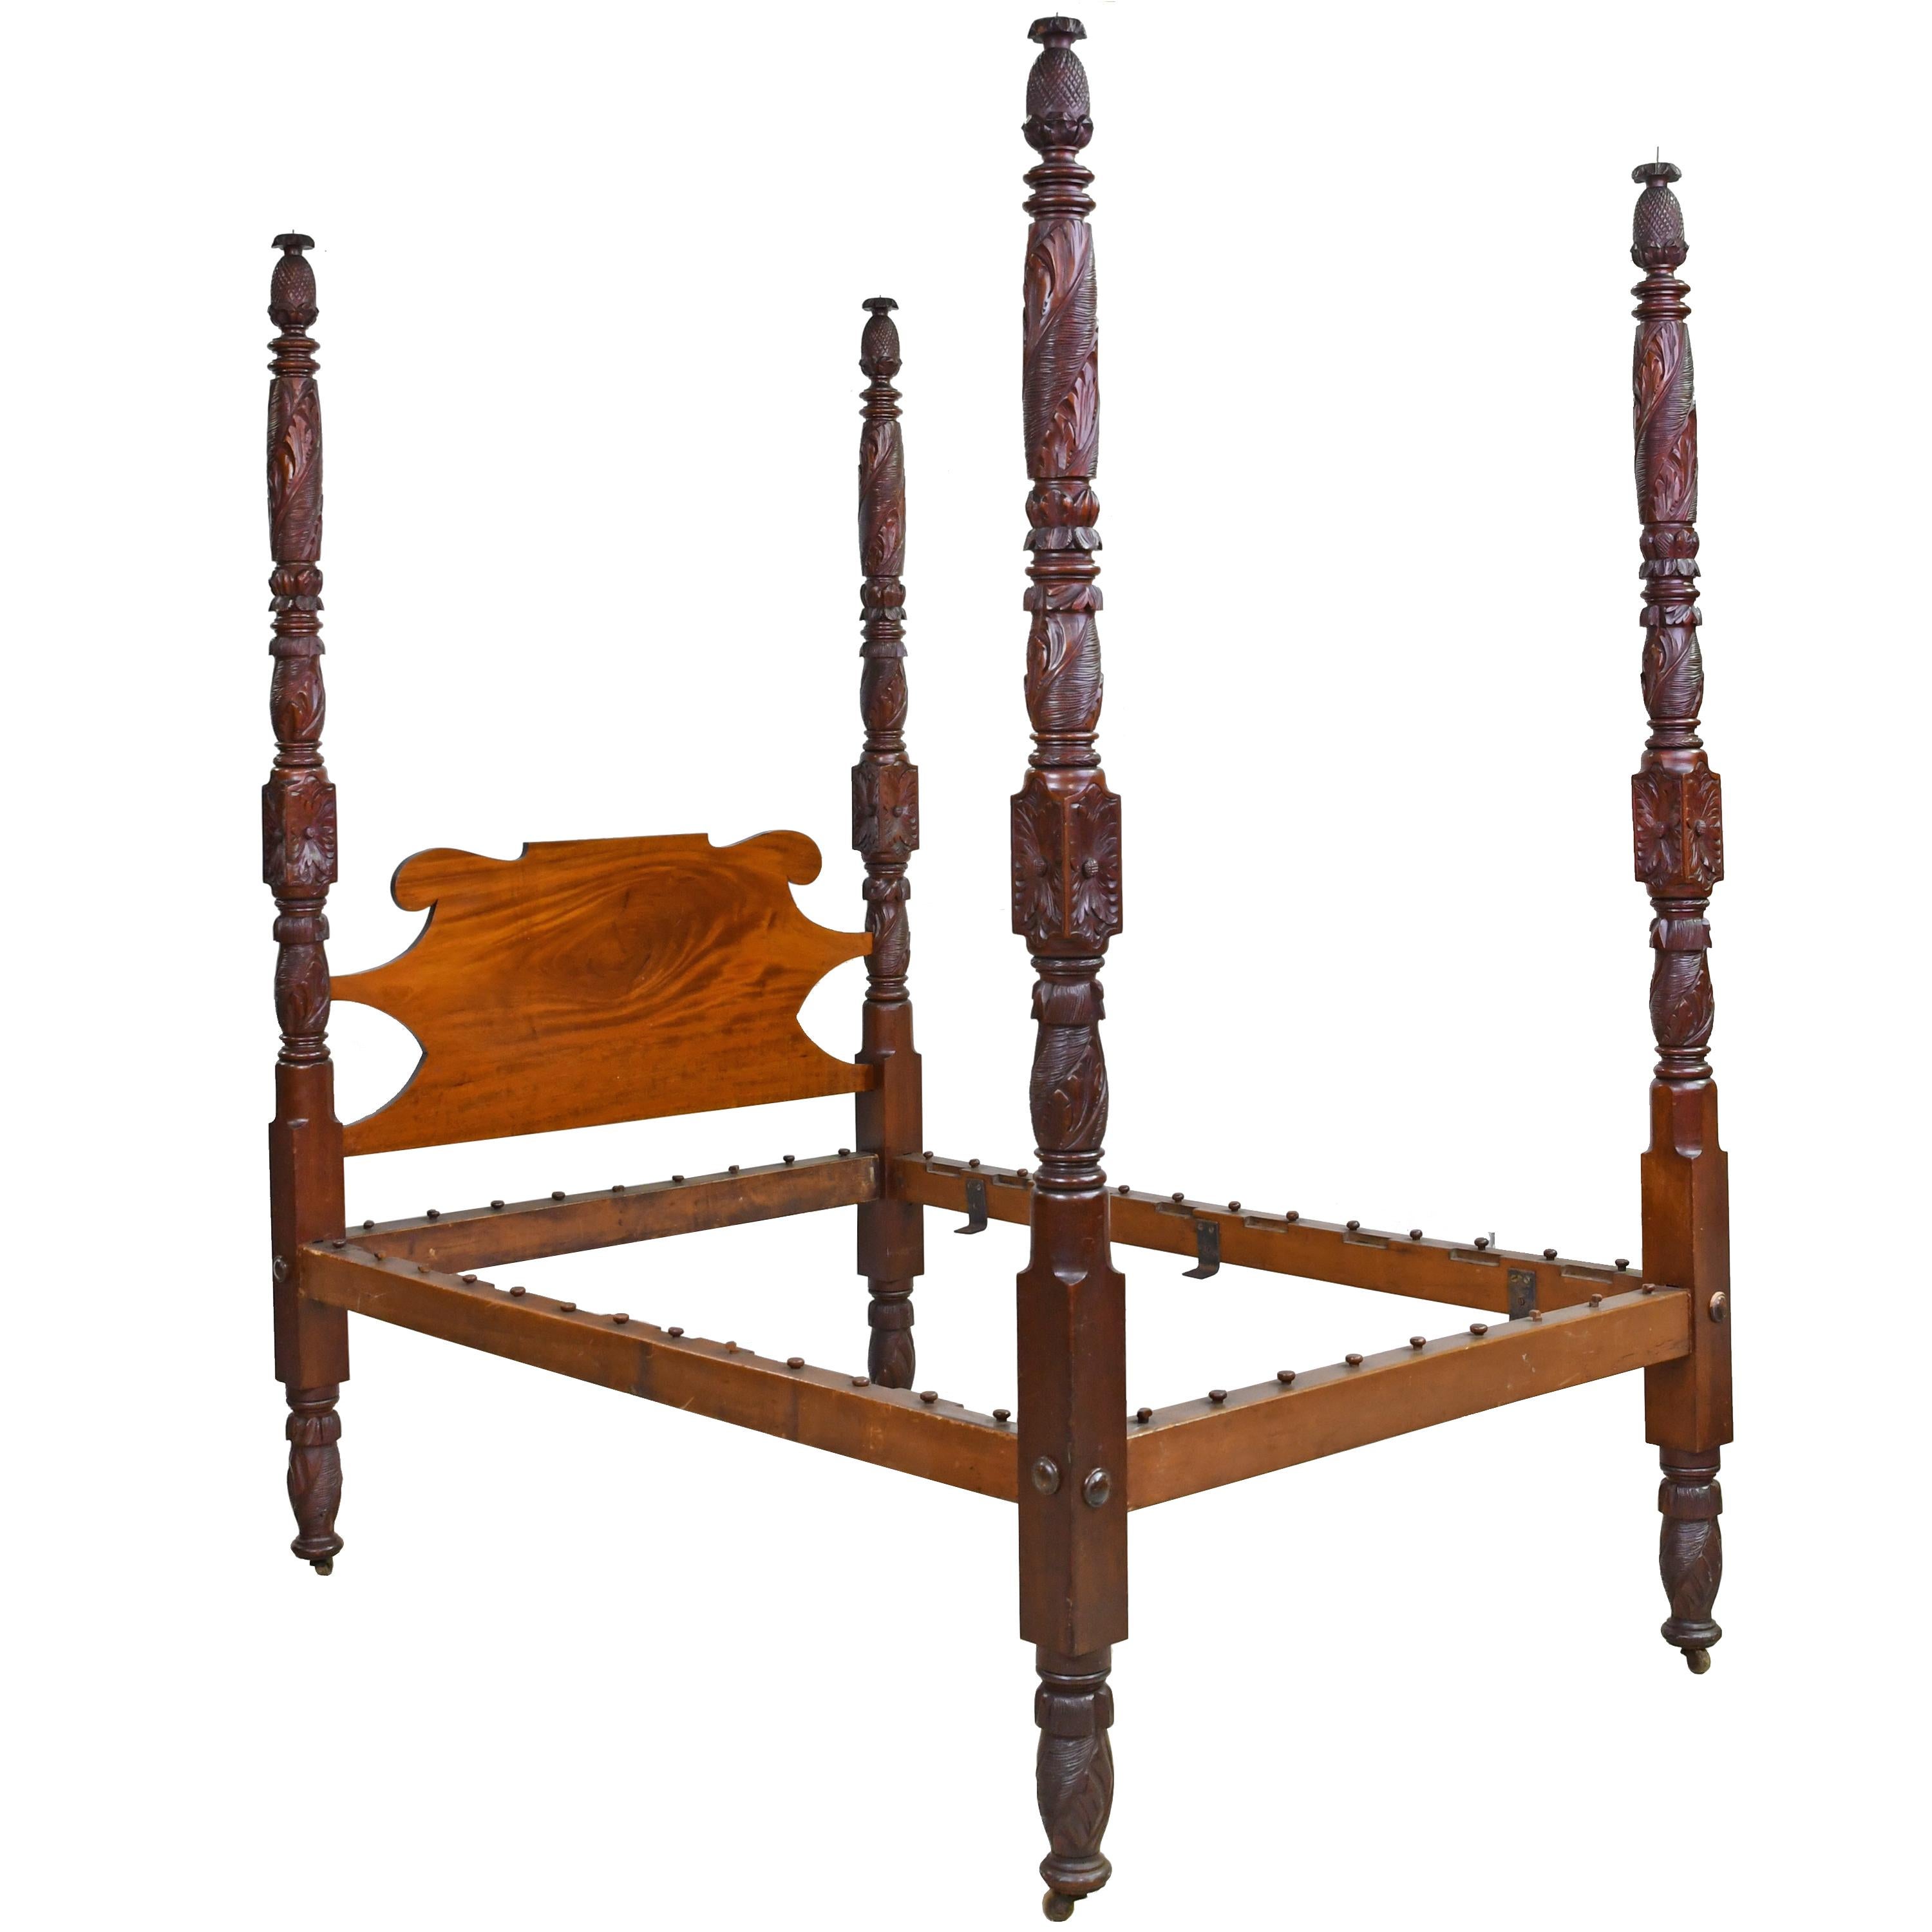 Hand-Carved American Empire Four Poster Bed with Acanthus Carvings, circa 1820